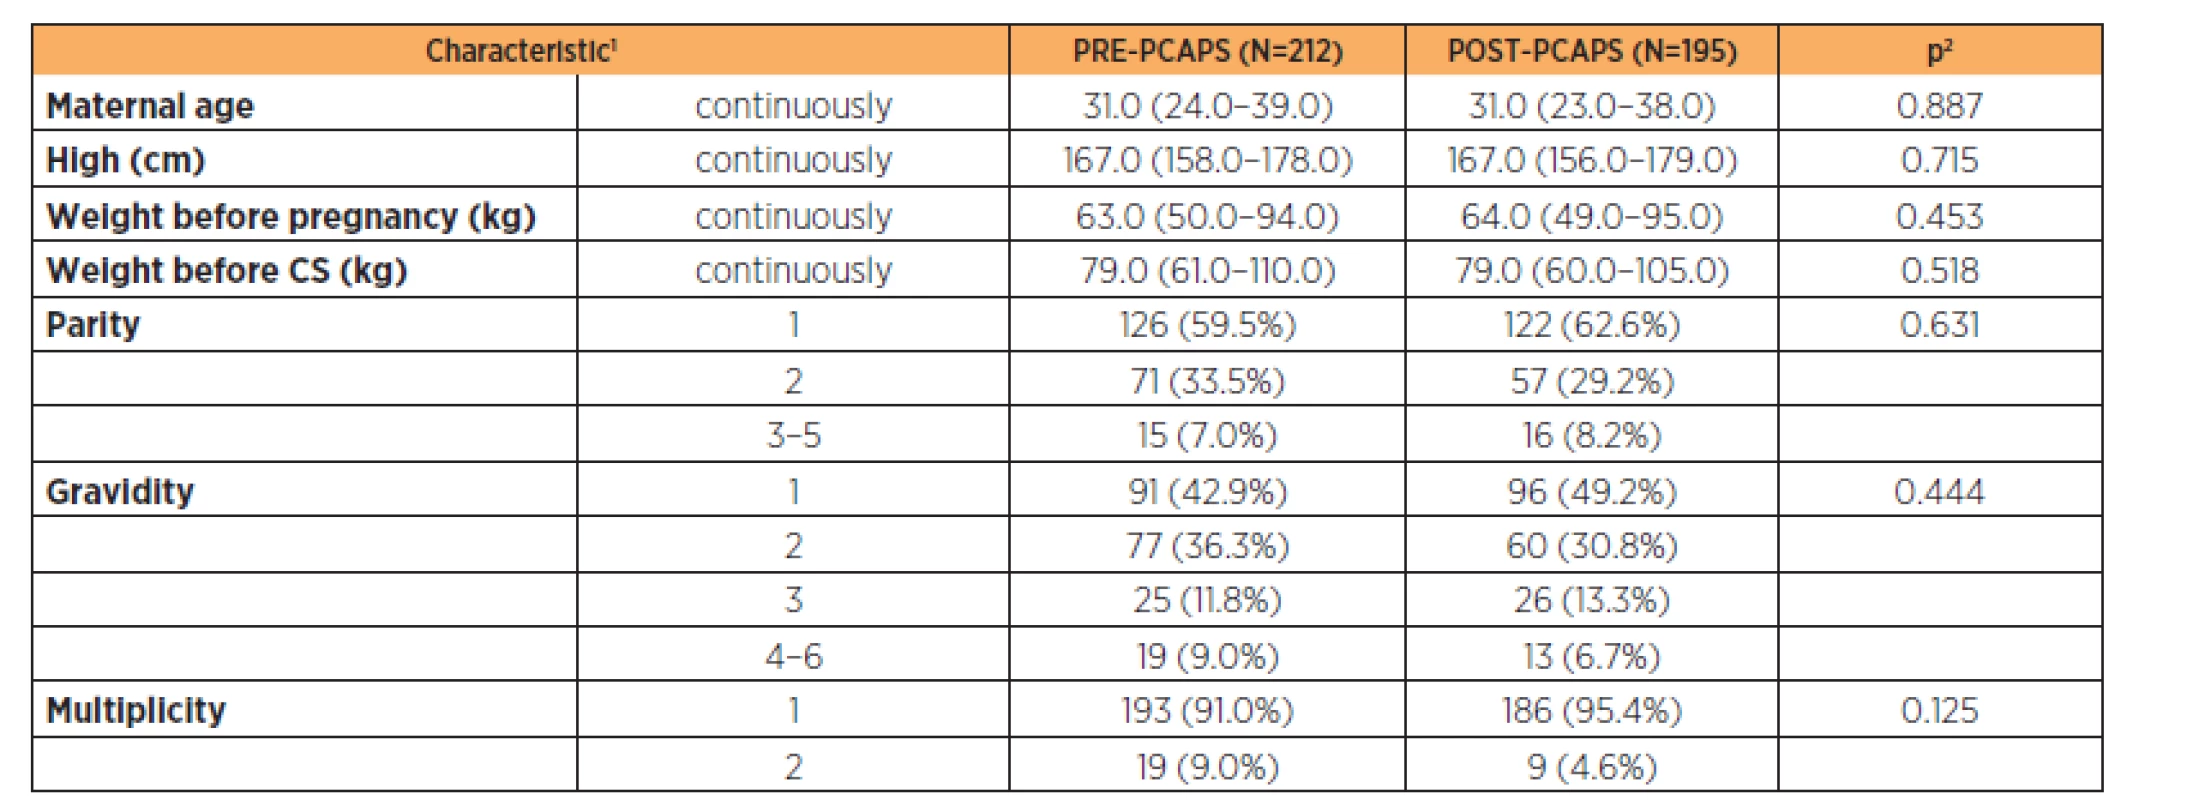 Comparison of obstetric characteristics of both PRE-PCAPS and POST-PCAPS group